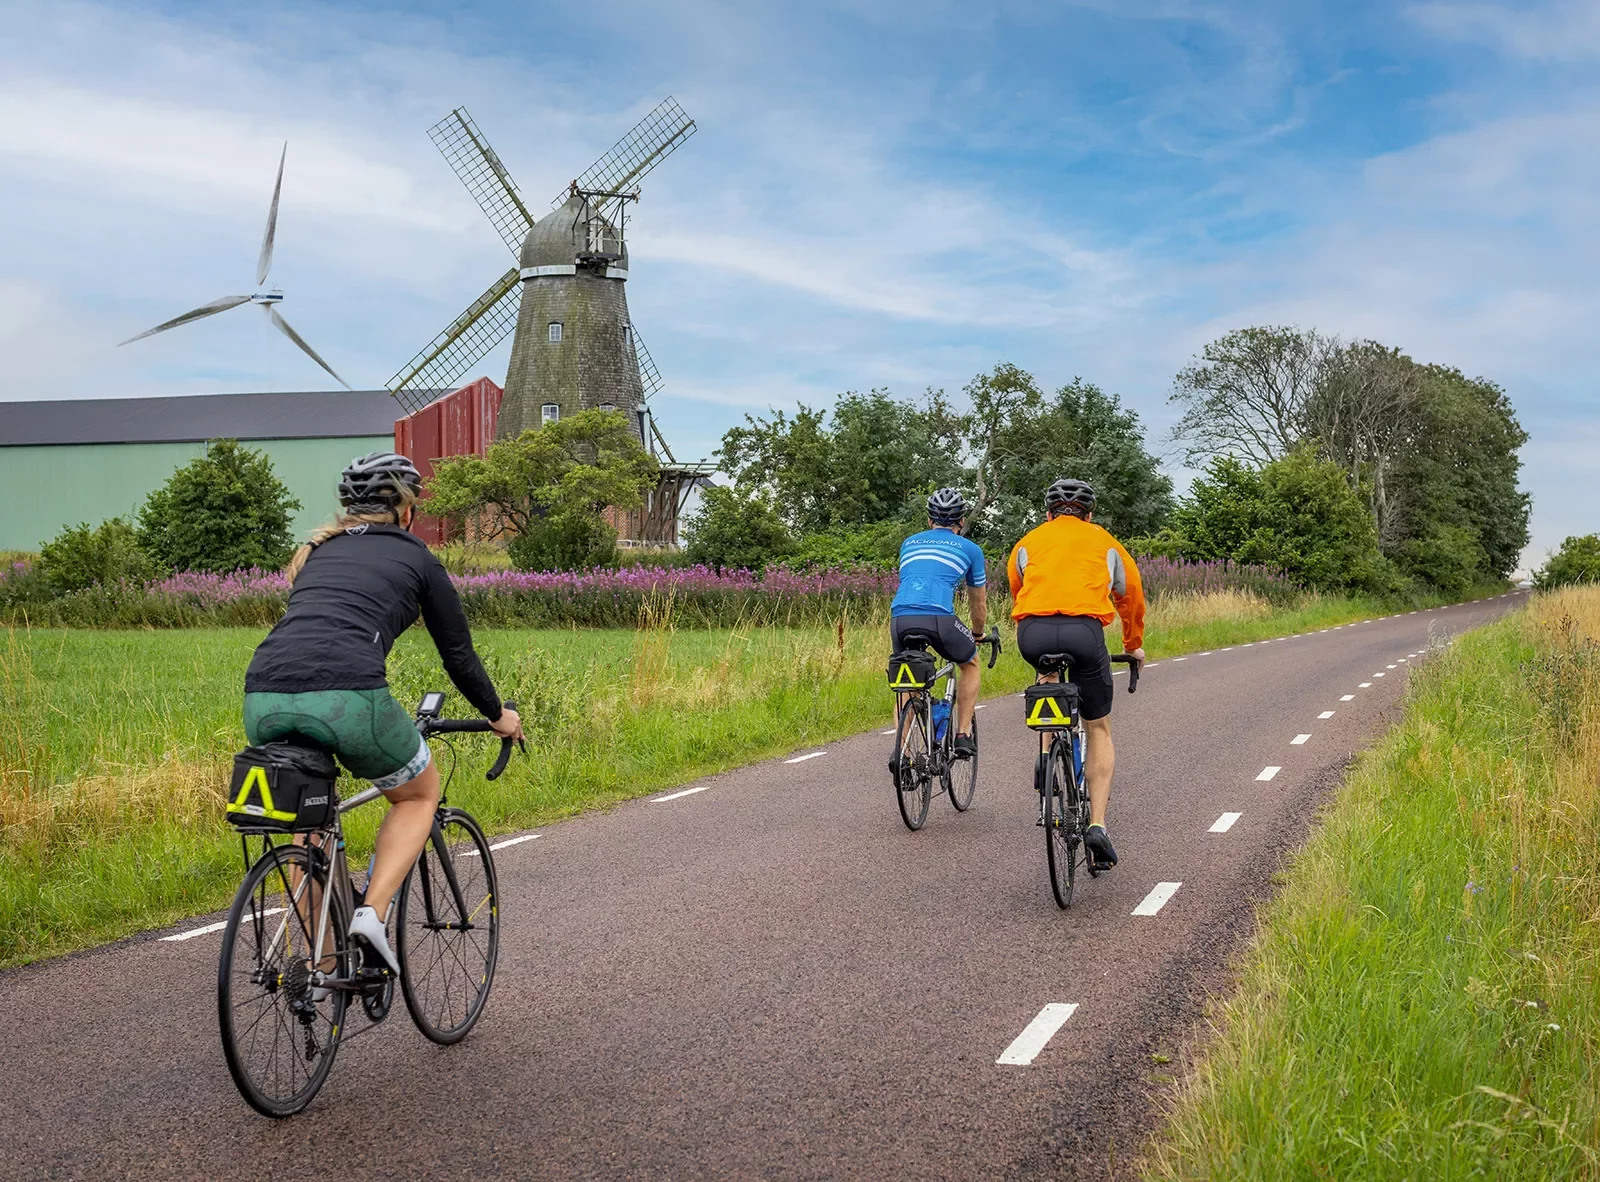 Cycling by Windmills